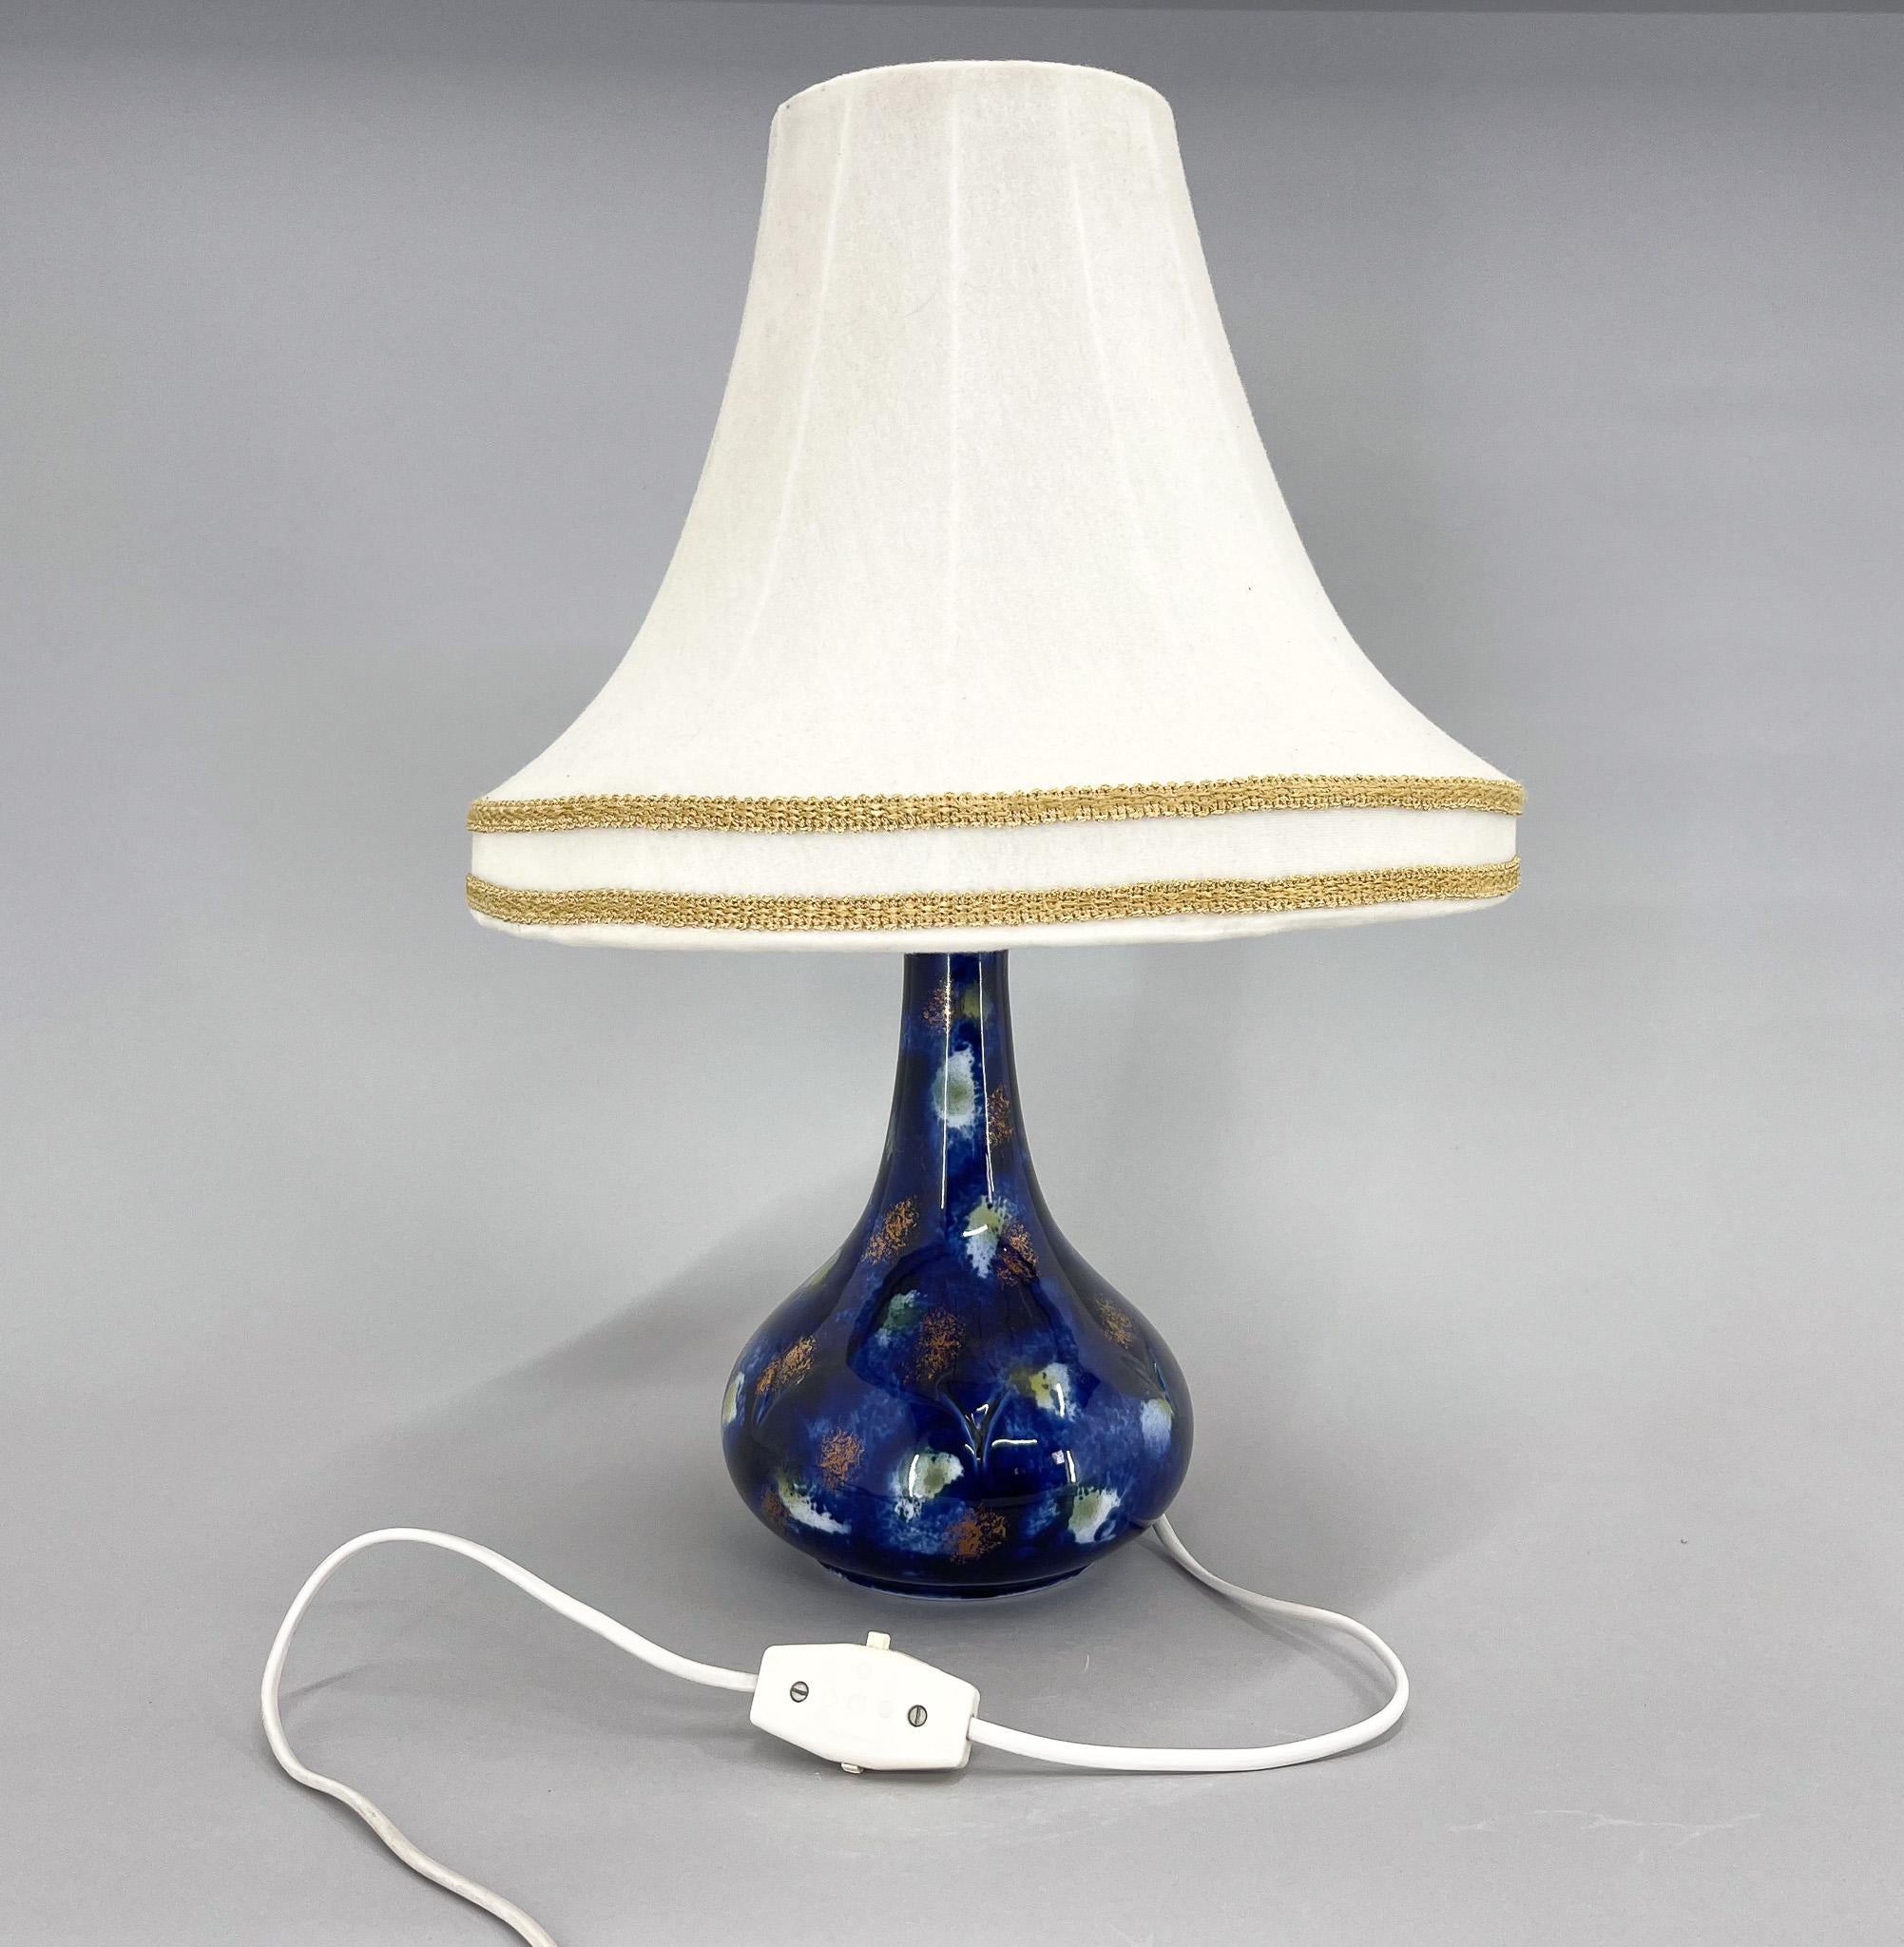 Unusual vintage table lamp from former Czechoslovakia with ceramic base and original fabric lamp shade. Bulb: E25-E27.